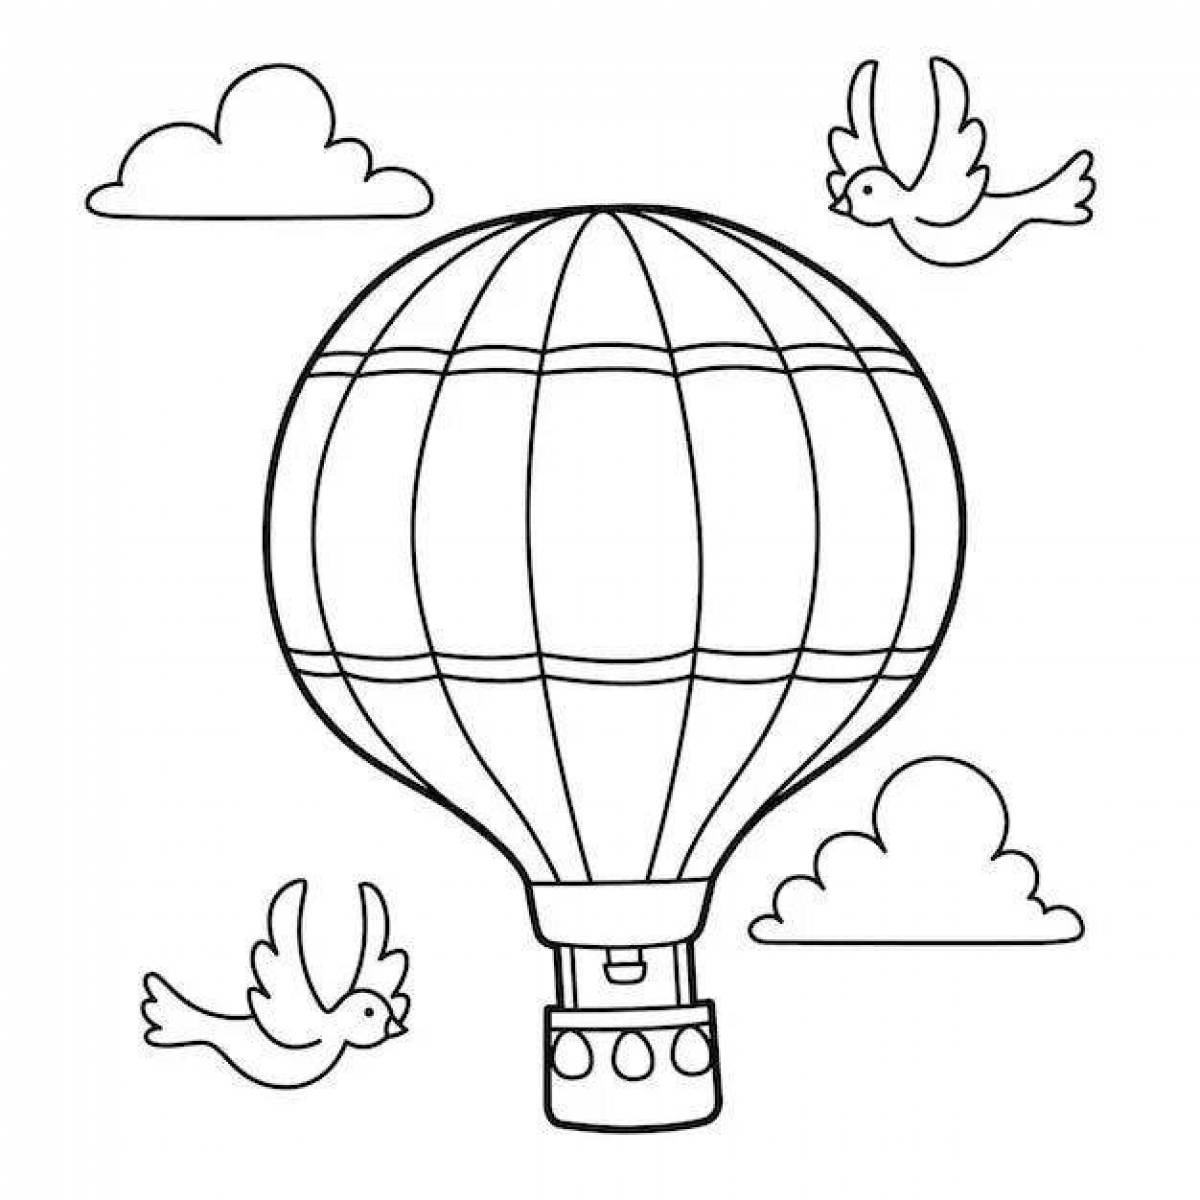 Coloring animated balloon with a basket for children